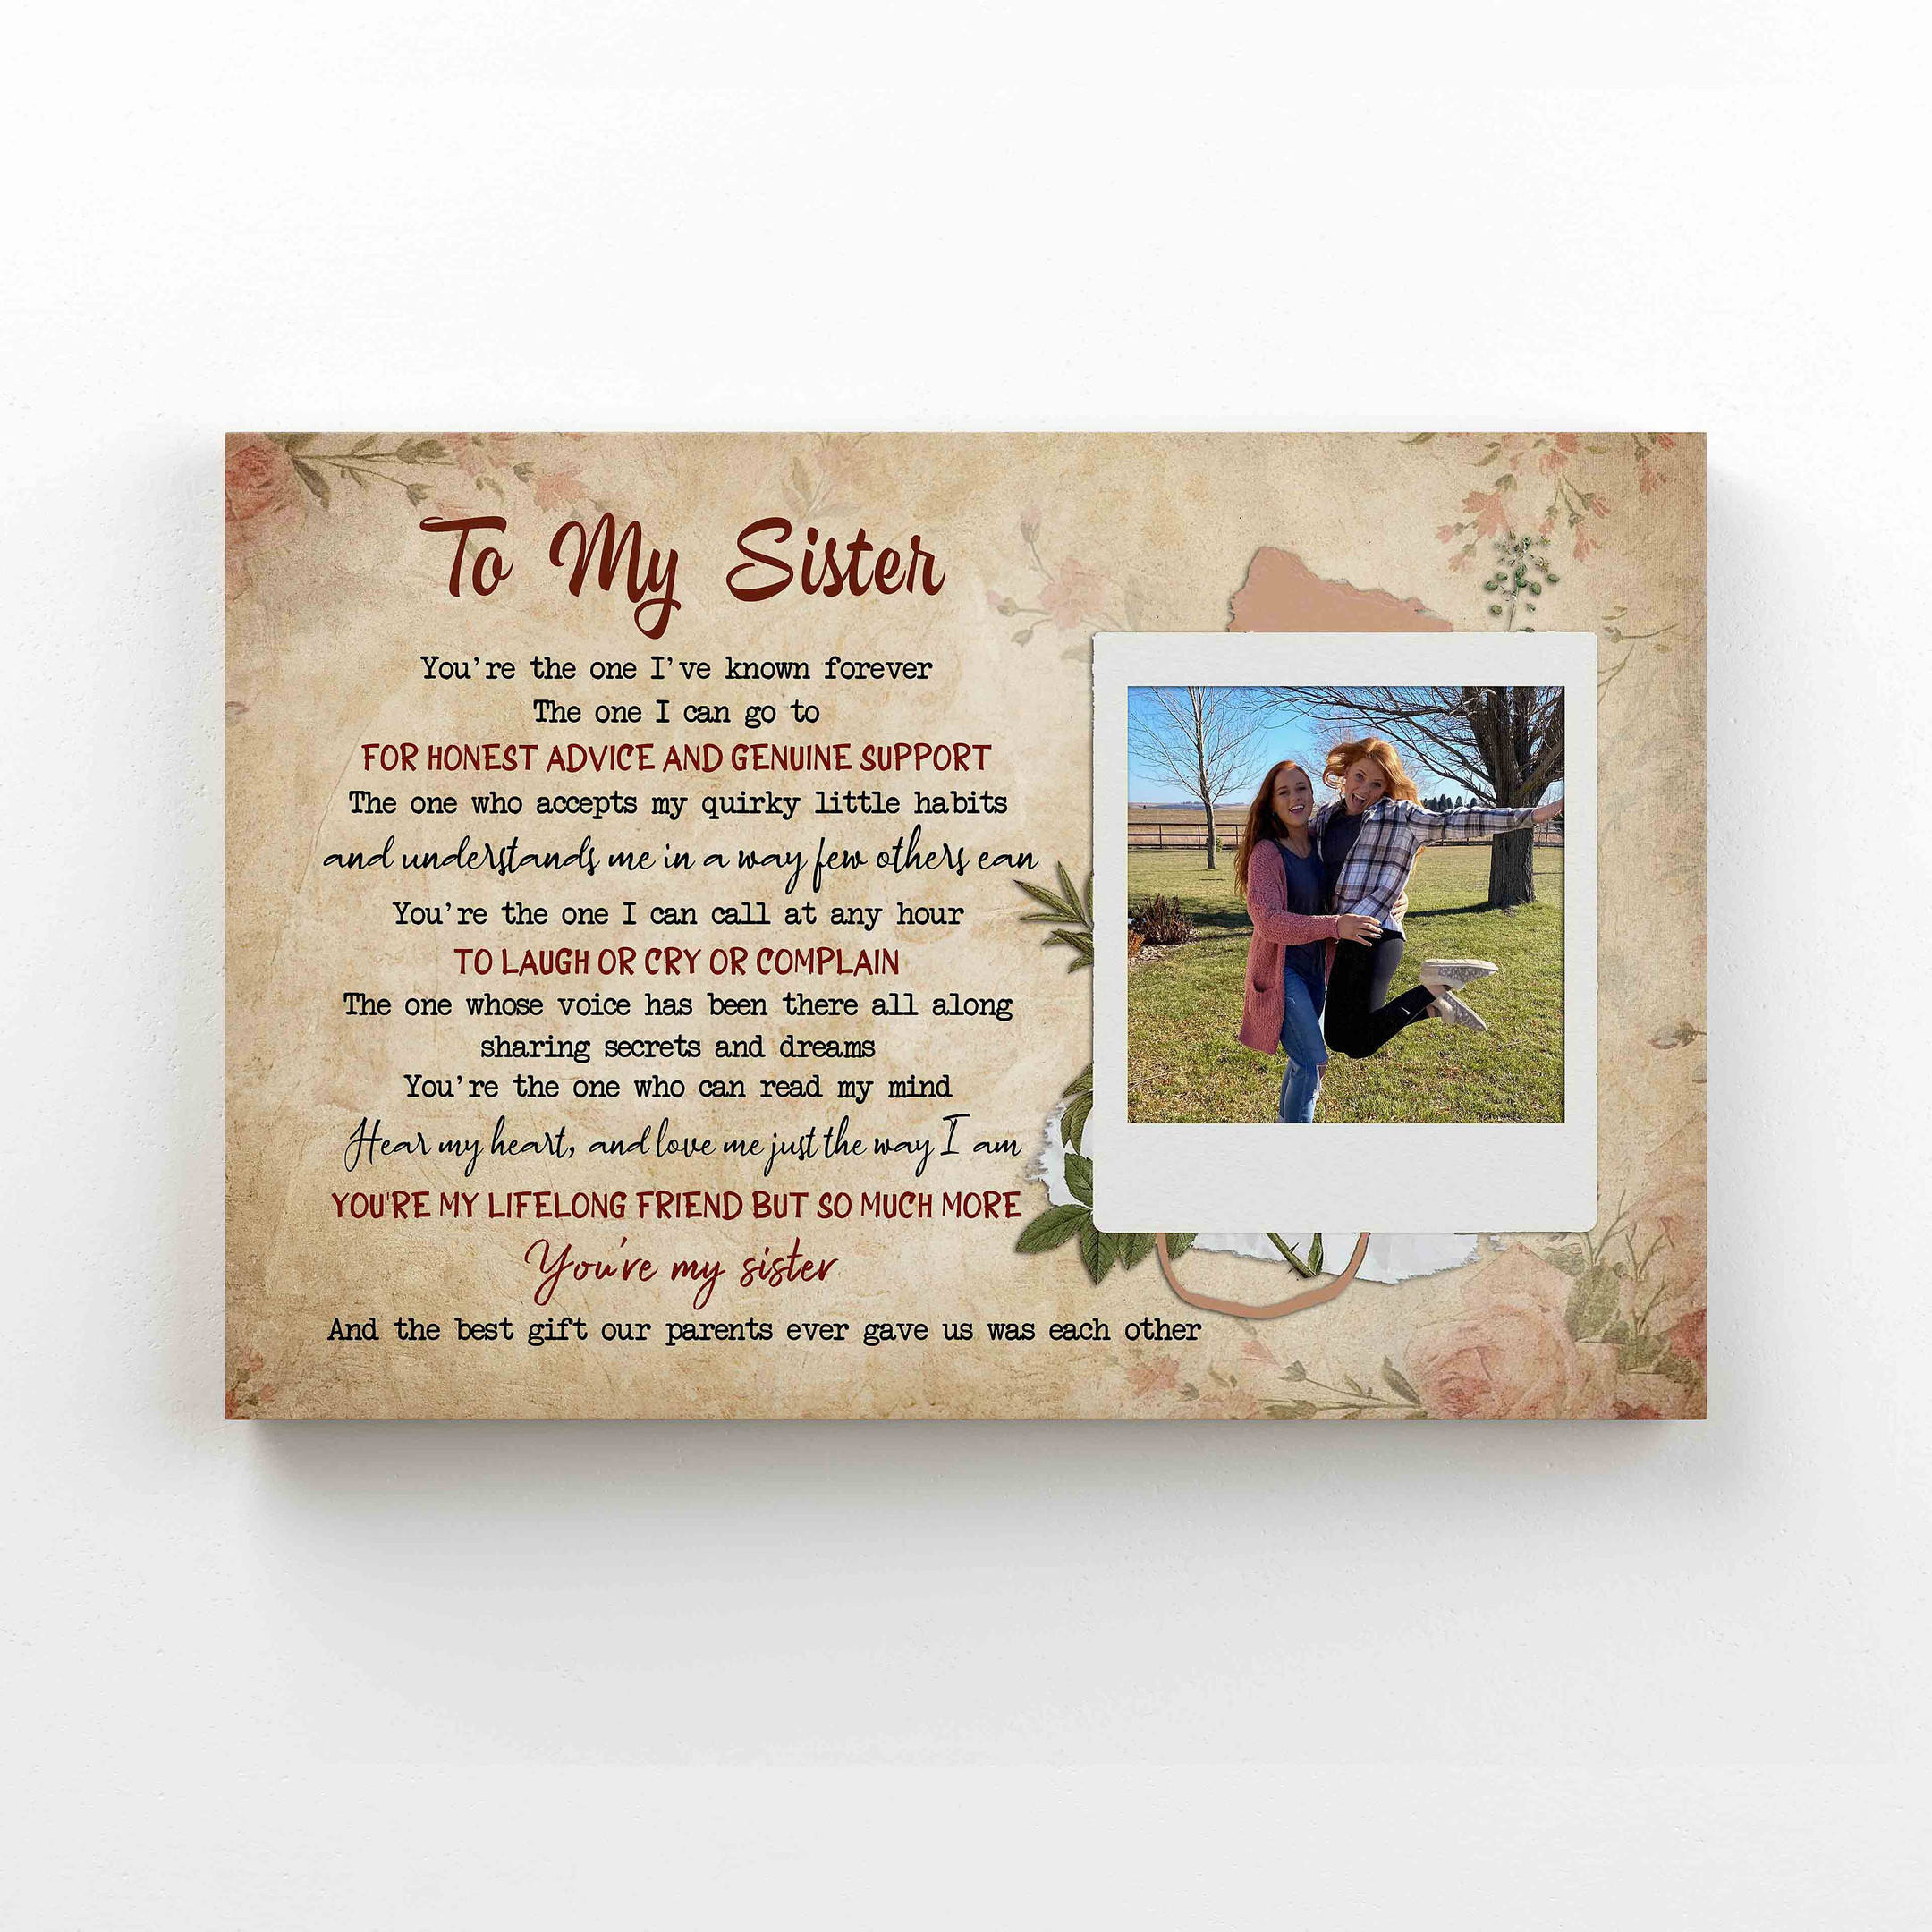 Personalized Photo Canvas, To My Sister Canvas, You’Re My Sister Canvas, Family Canvas, Gift Canvas, Christmas Canvas